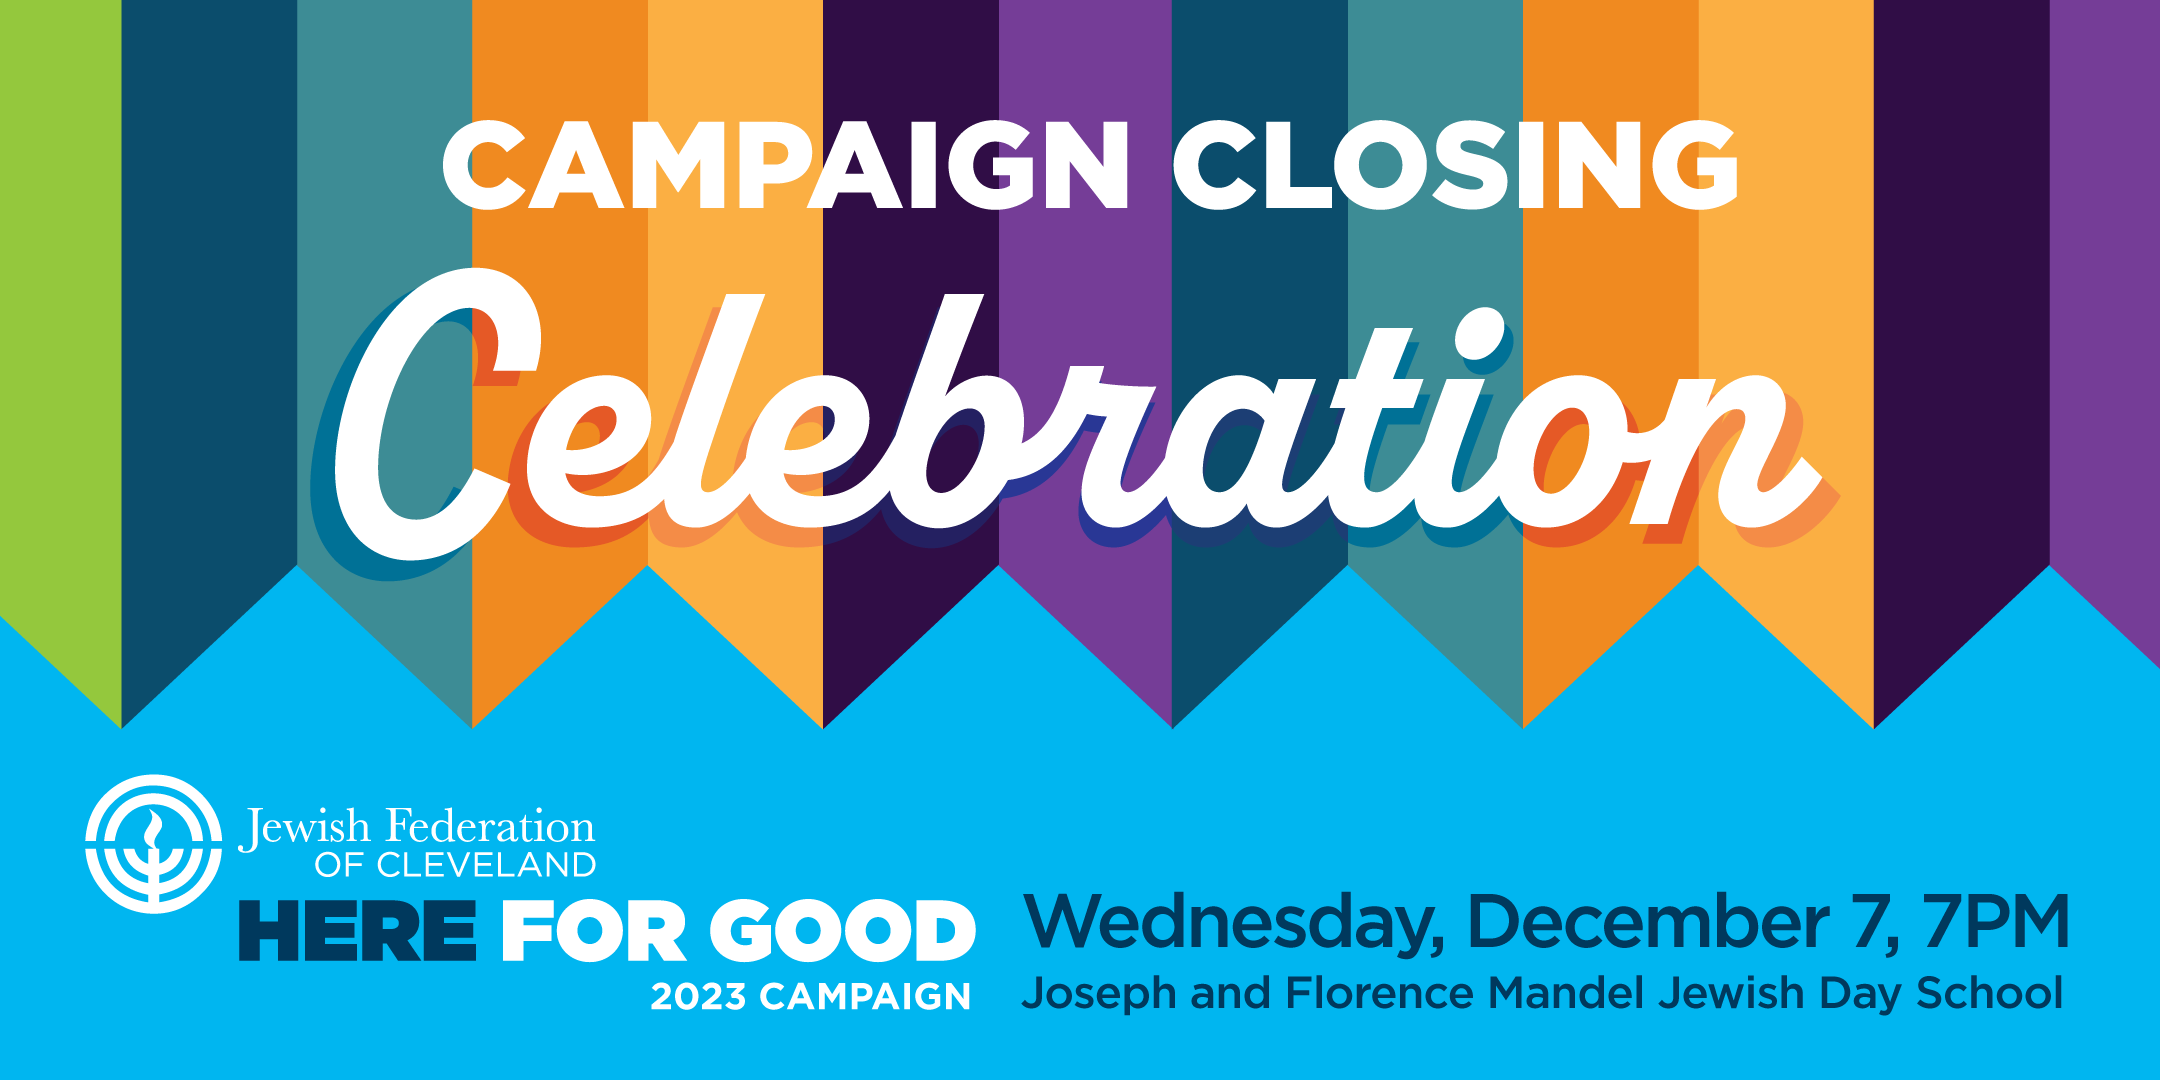 Glickman to be Honored at Campaign for Jewish Needs Closing Event